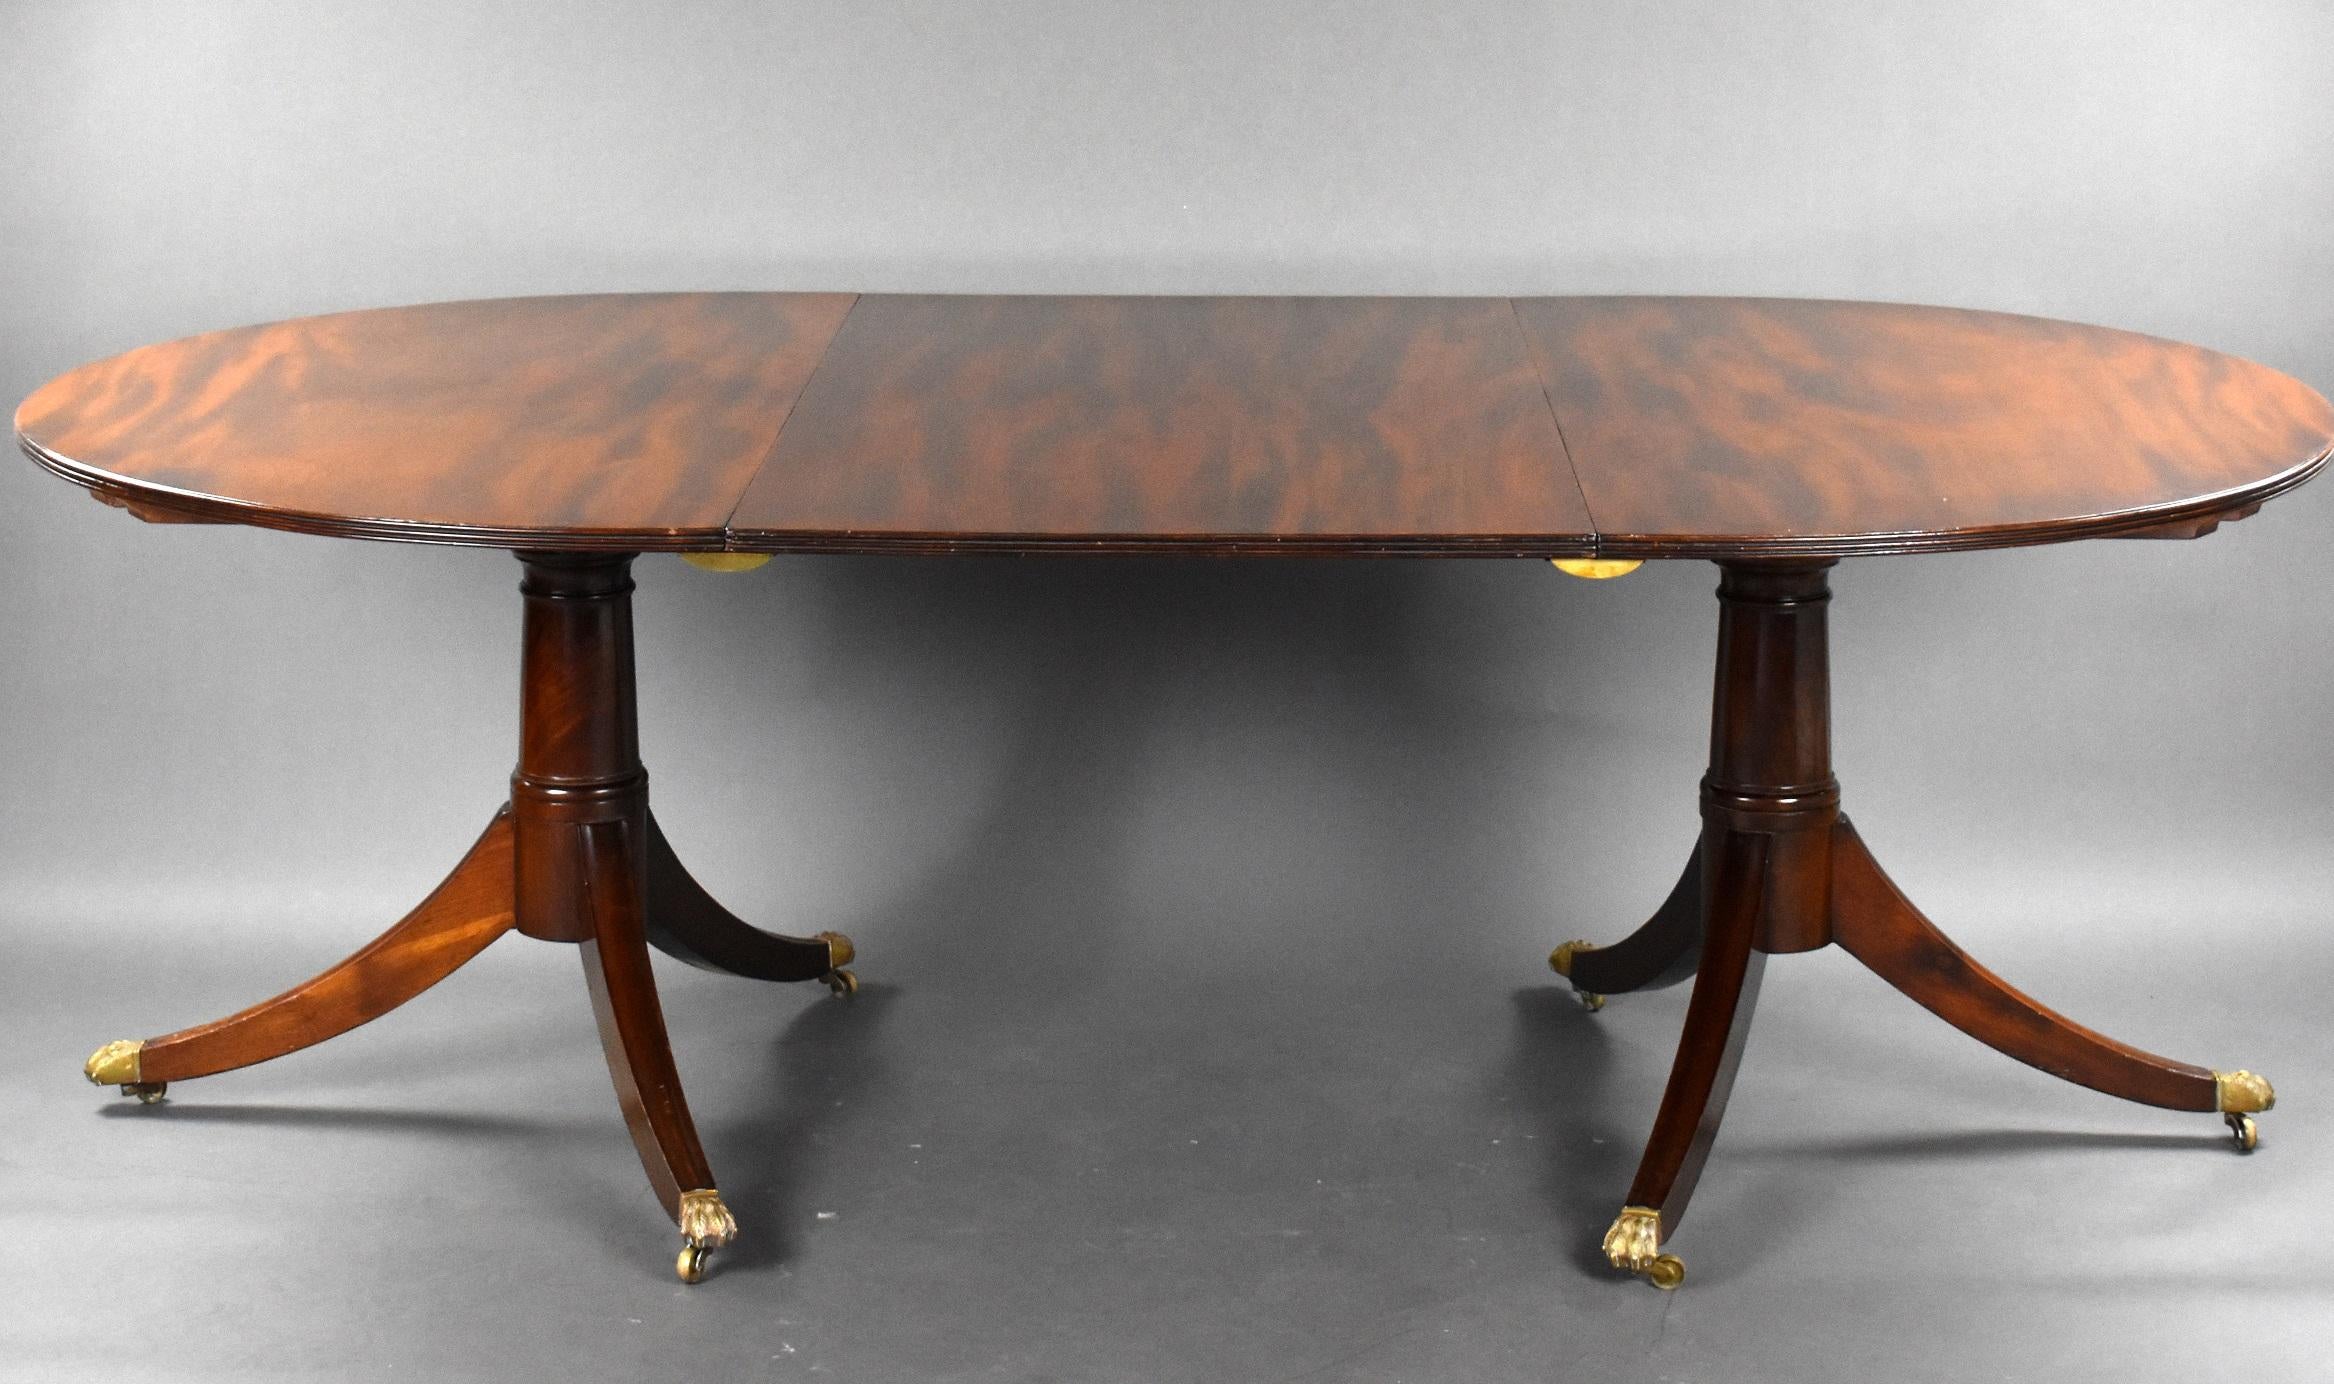 For sale is a good quality 19th century mahogany pedestal dining table, having a well figured top with an additional leaf, the table is on gun barrel supports, having elegantly splayed legs raised on brass lions paw castors. The table is in good